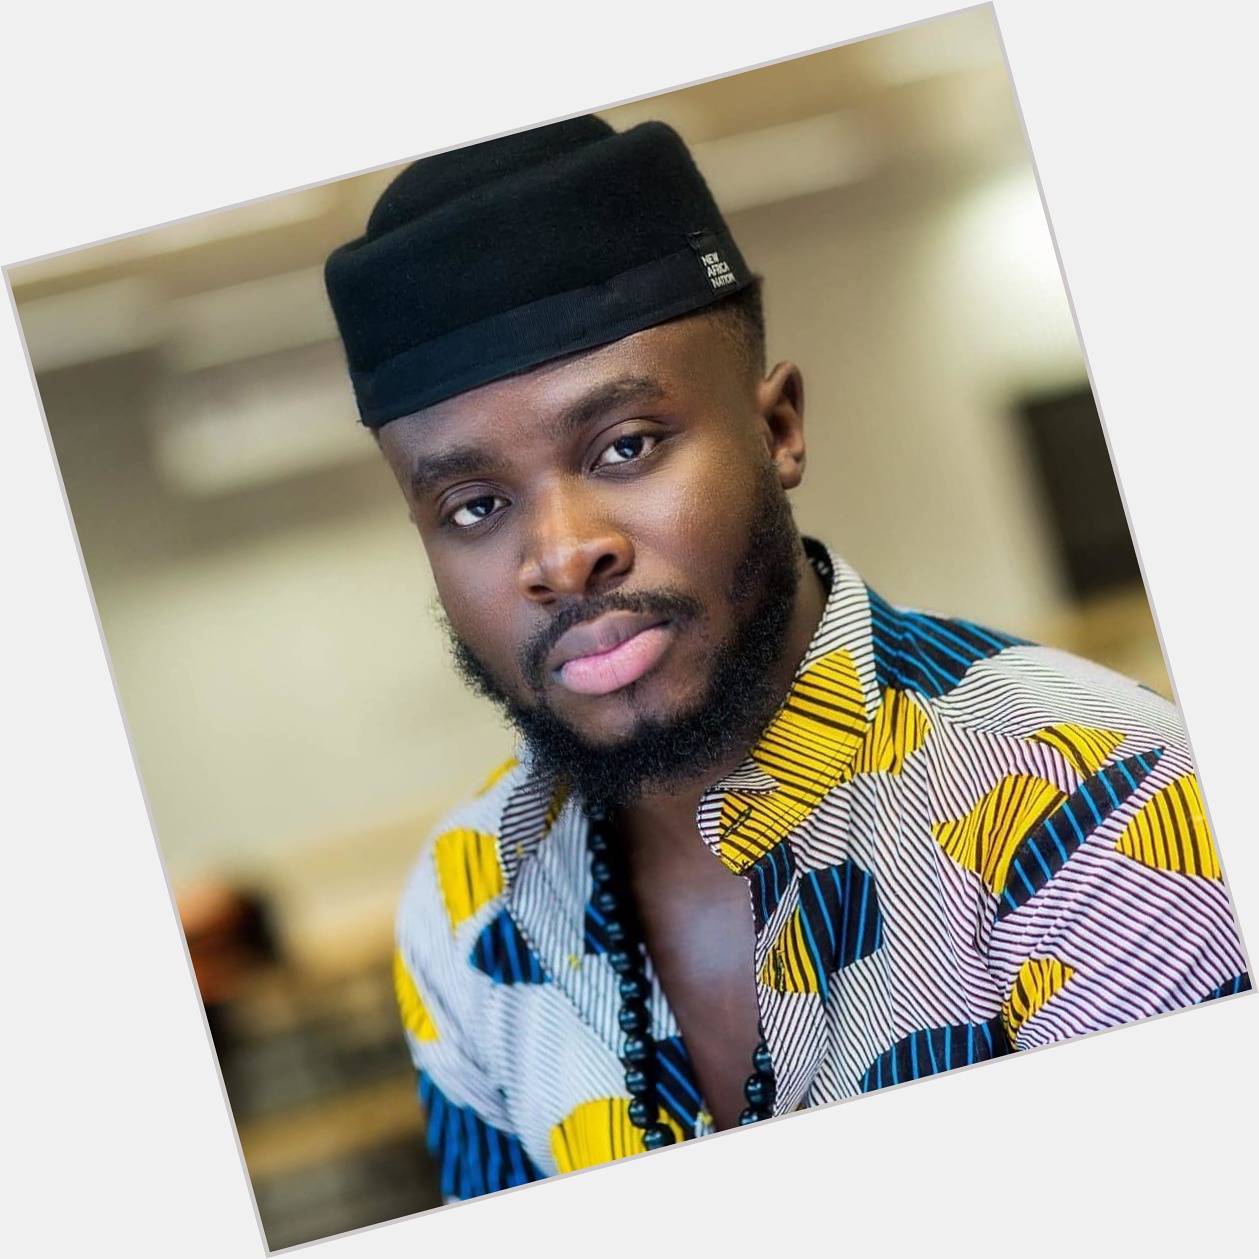 Https://fanpagepress.net/m/F/Fuse Odg Hairstyle 3